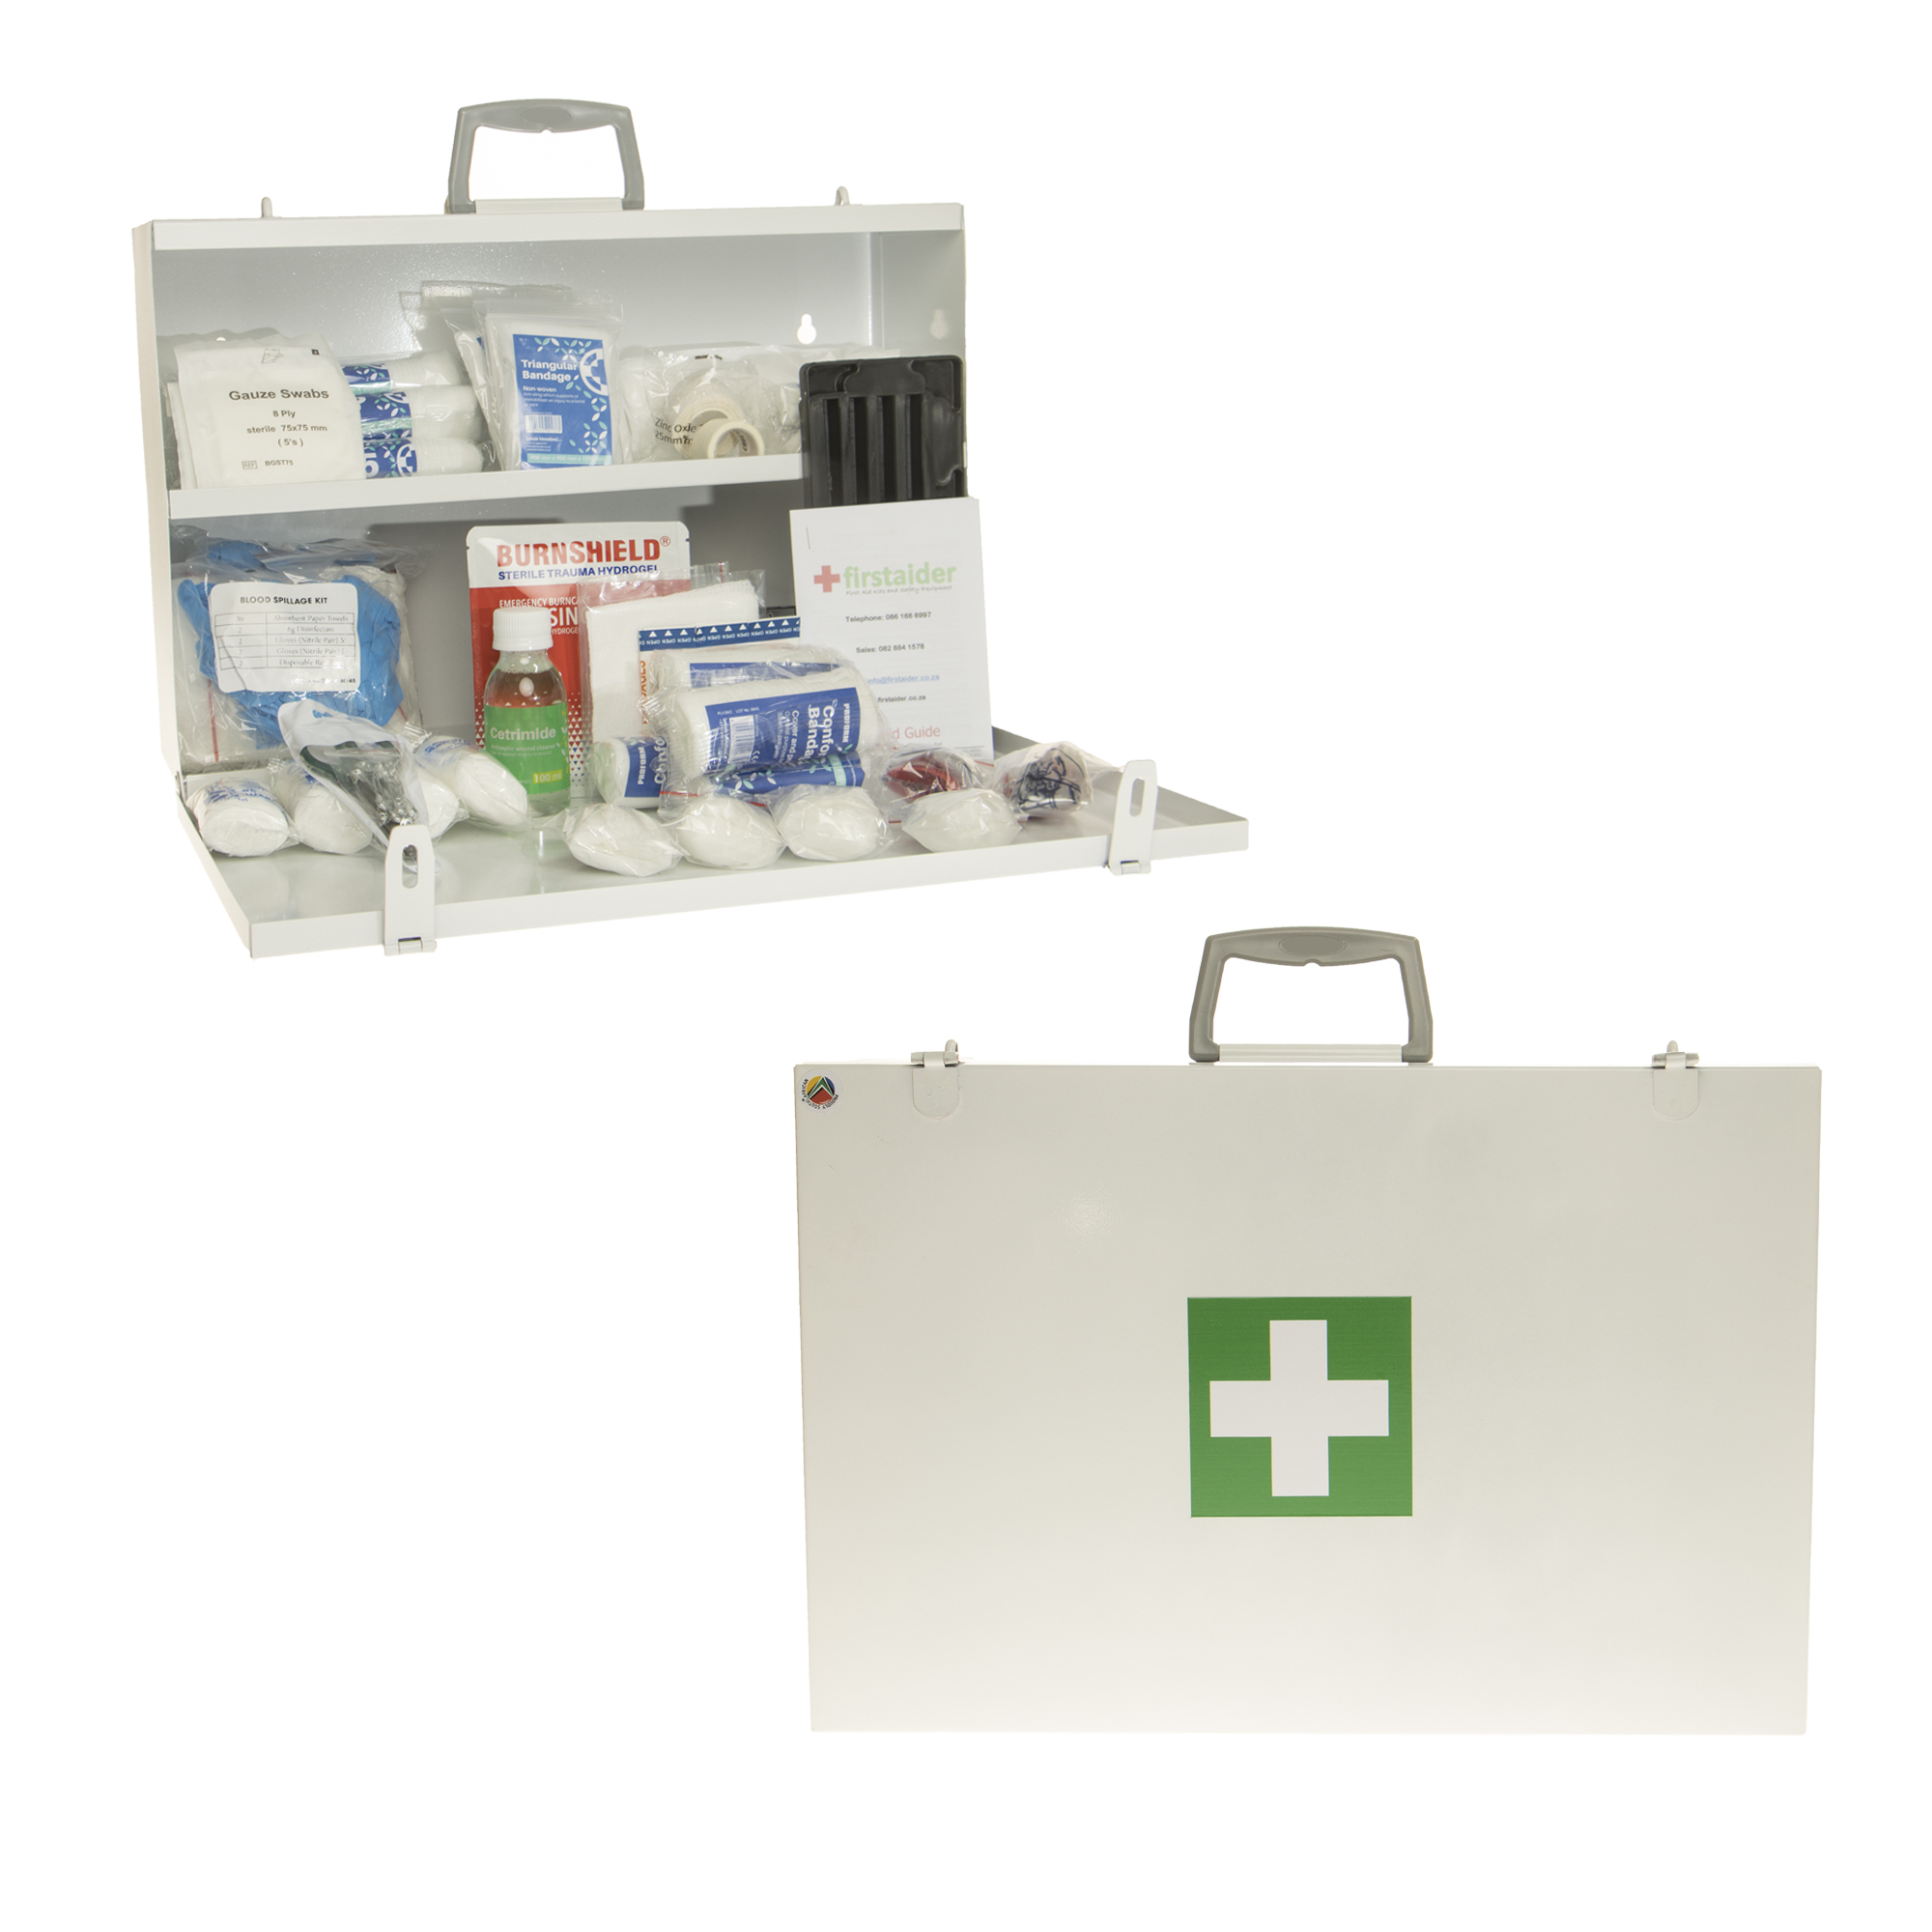 Regulation 7 First Aid Kit (5-50 Persons) in Metal Box by Firstaider